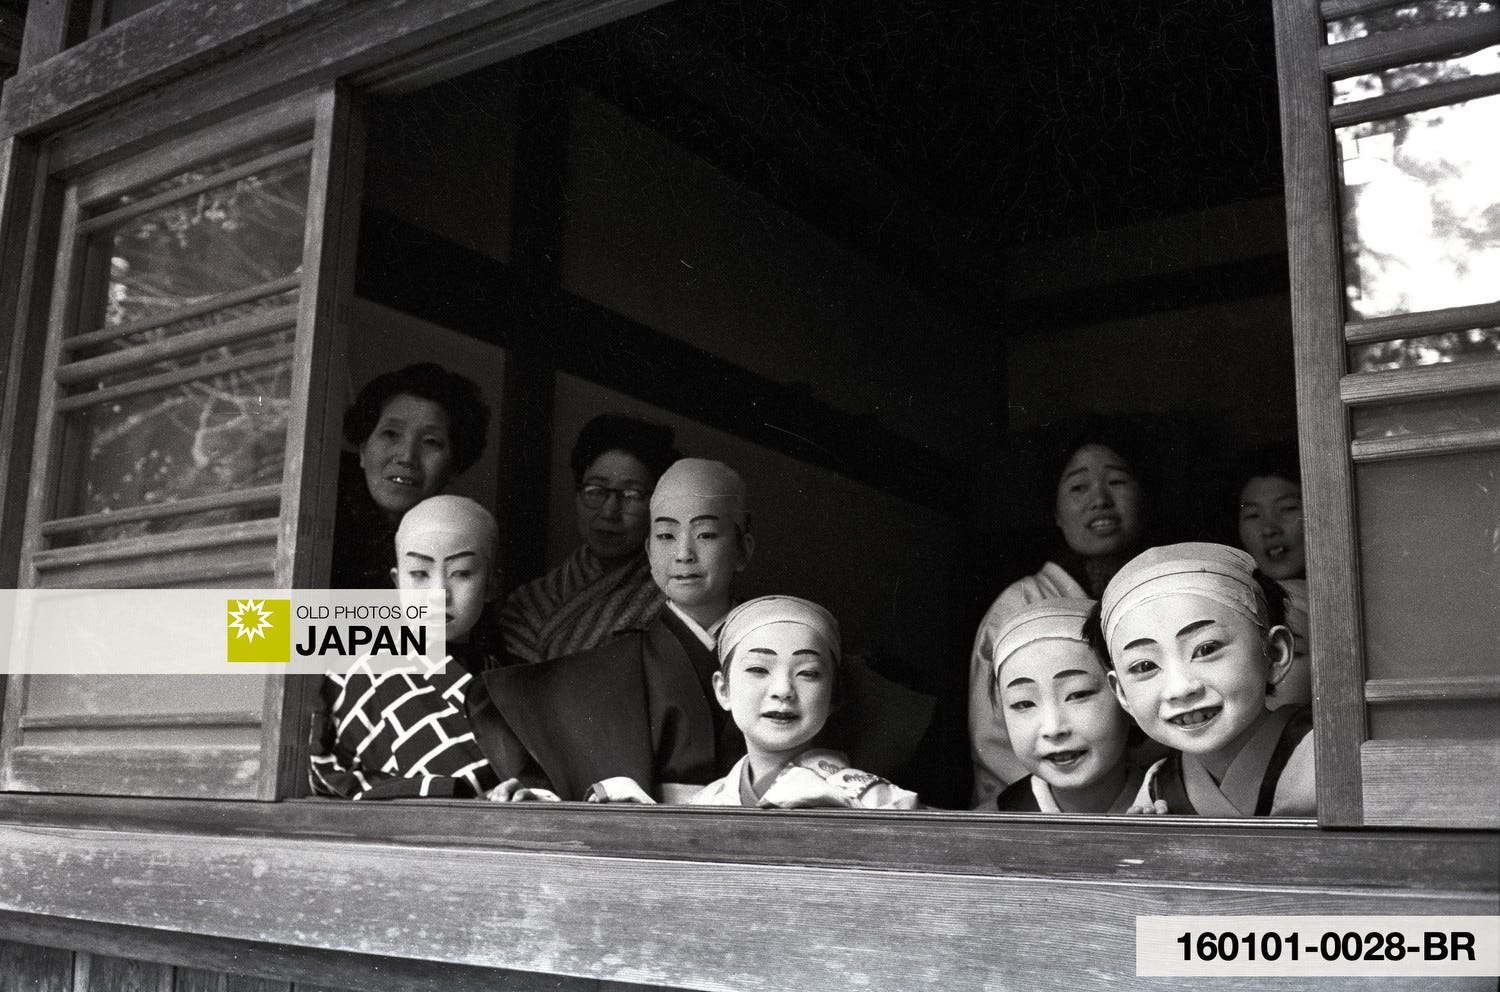 Boys dressed up for a traditional theater performance in Nikko, Tochigi, 1958